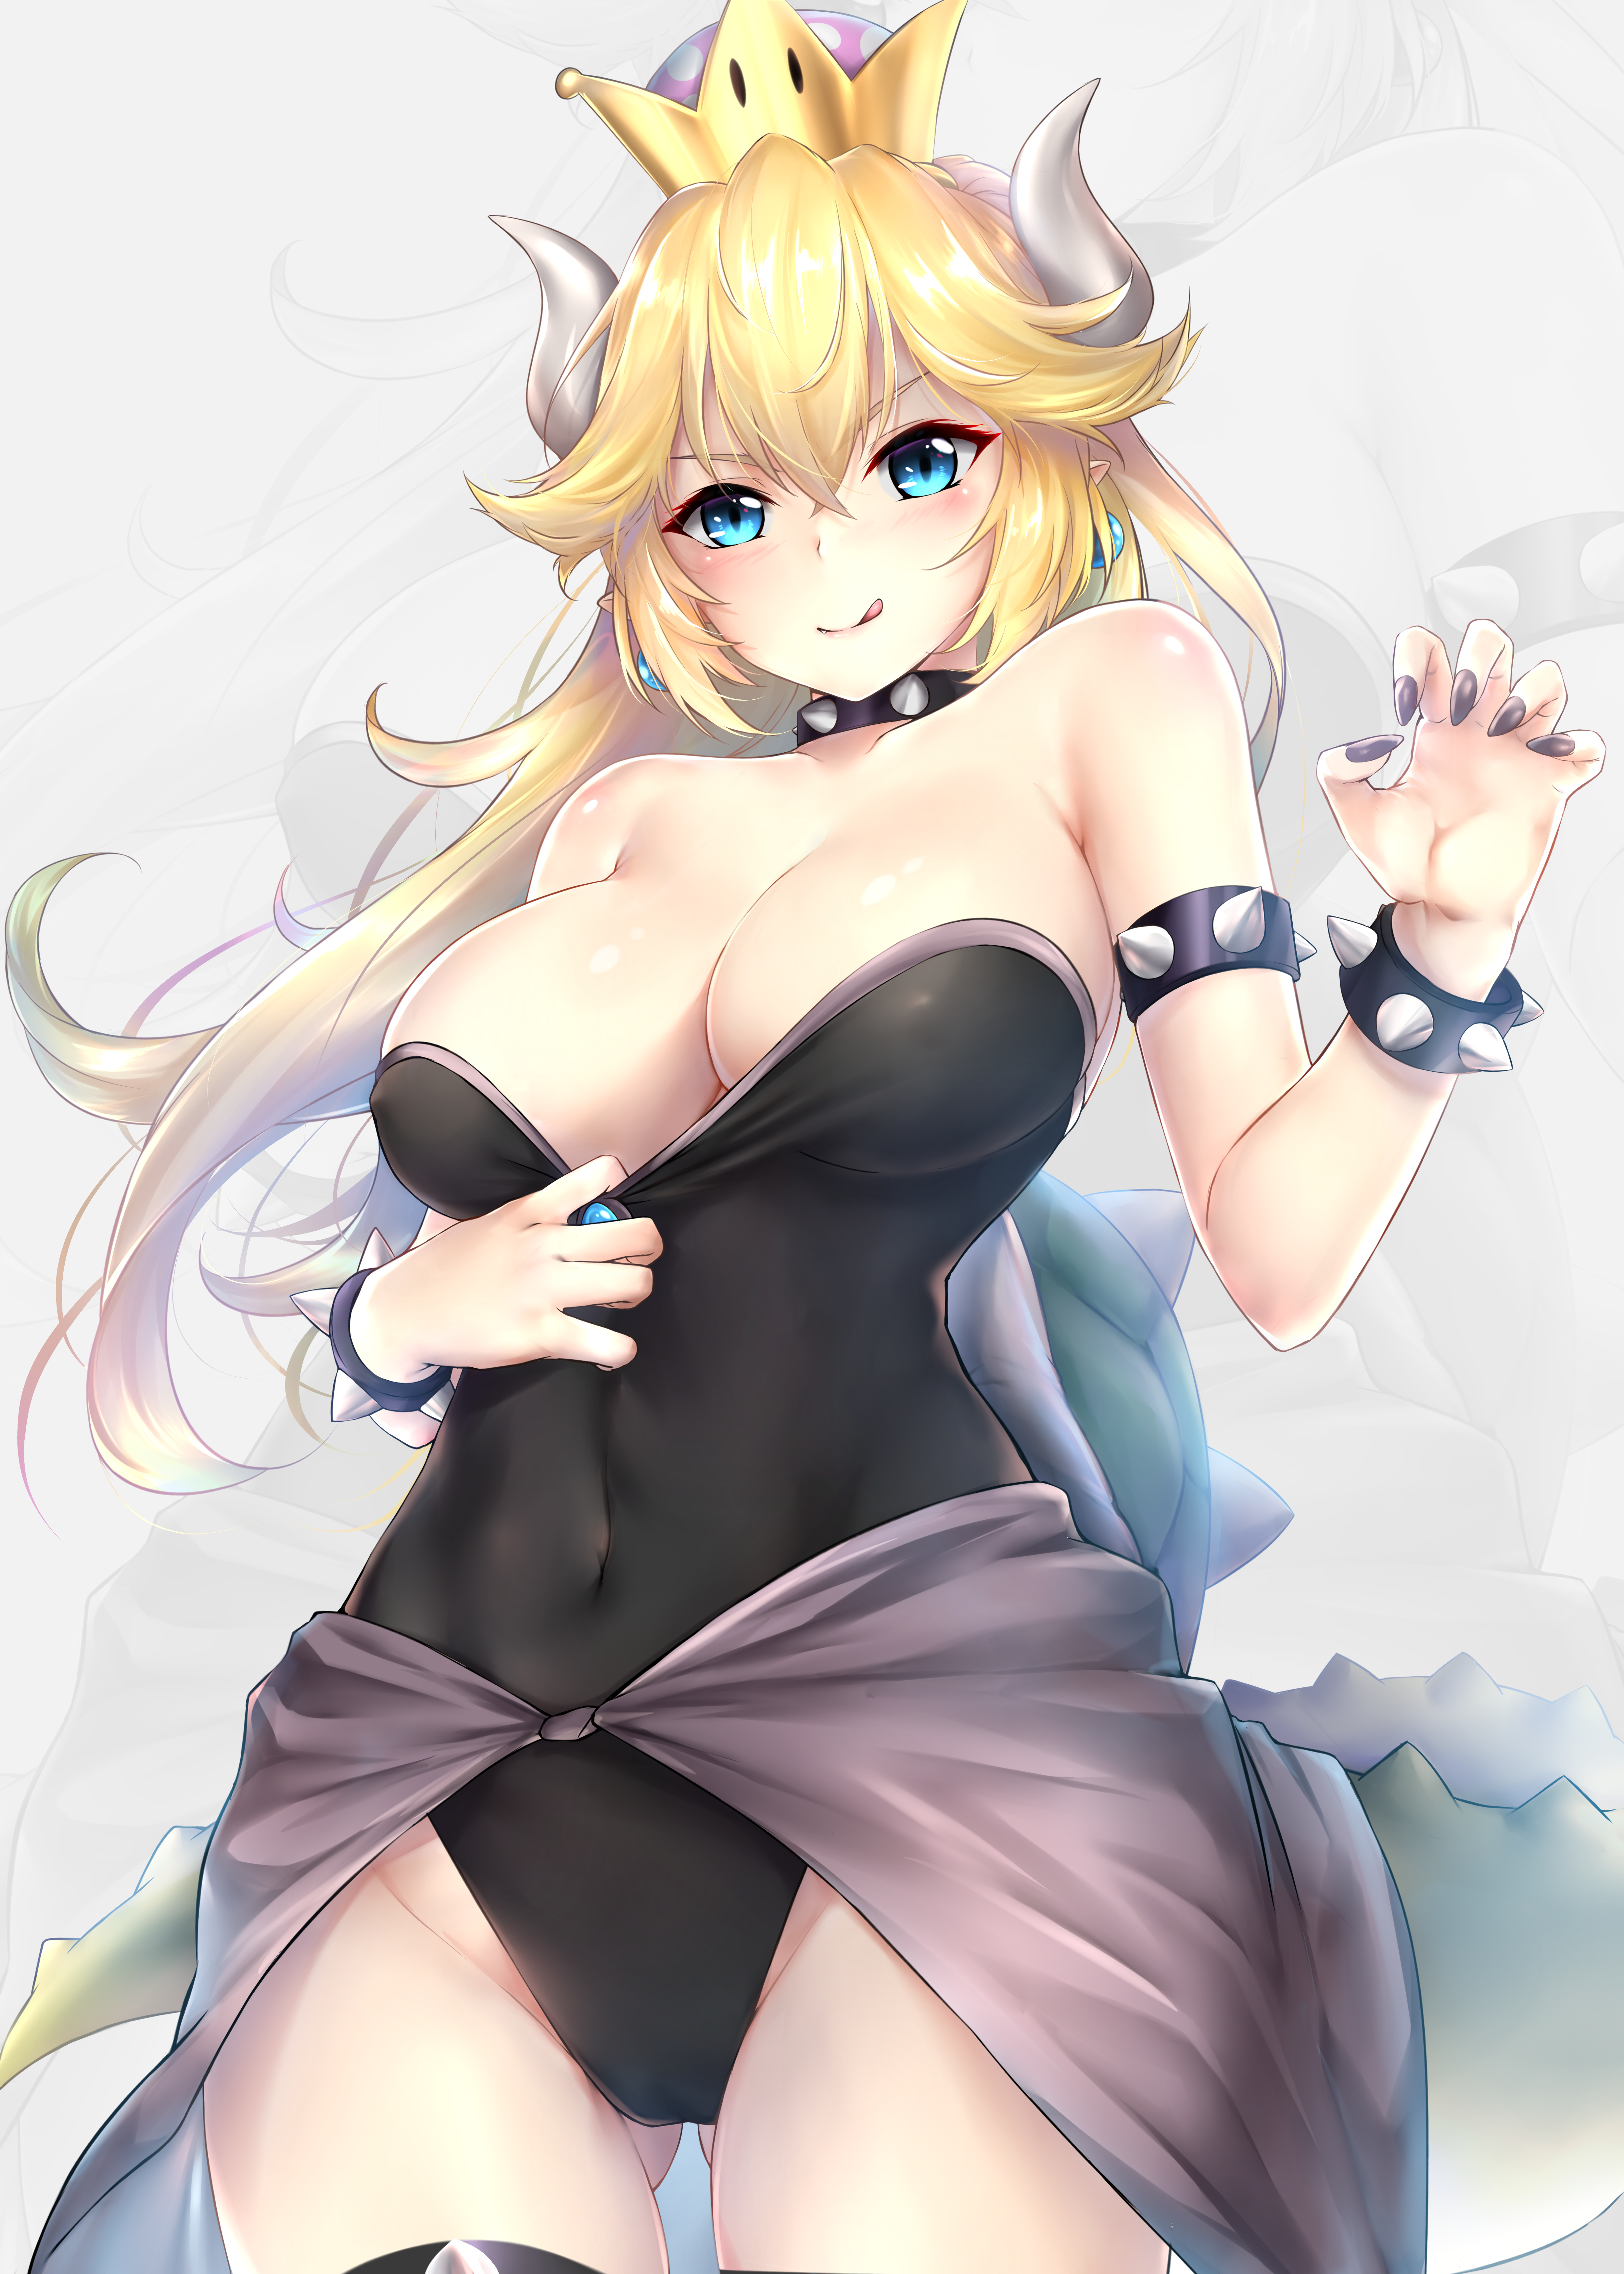 Anime 5000x7000 artwork anime girls big boobs Super Mario Bowsette Rei Kun Mario Bros. blonde blue eyes one-piece swimsuit tight clothing tight dress lifting dress Nintendo horns cleavage standing